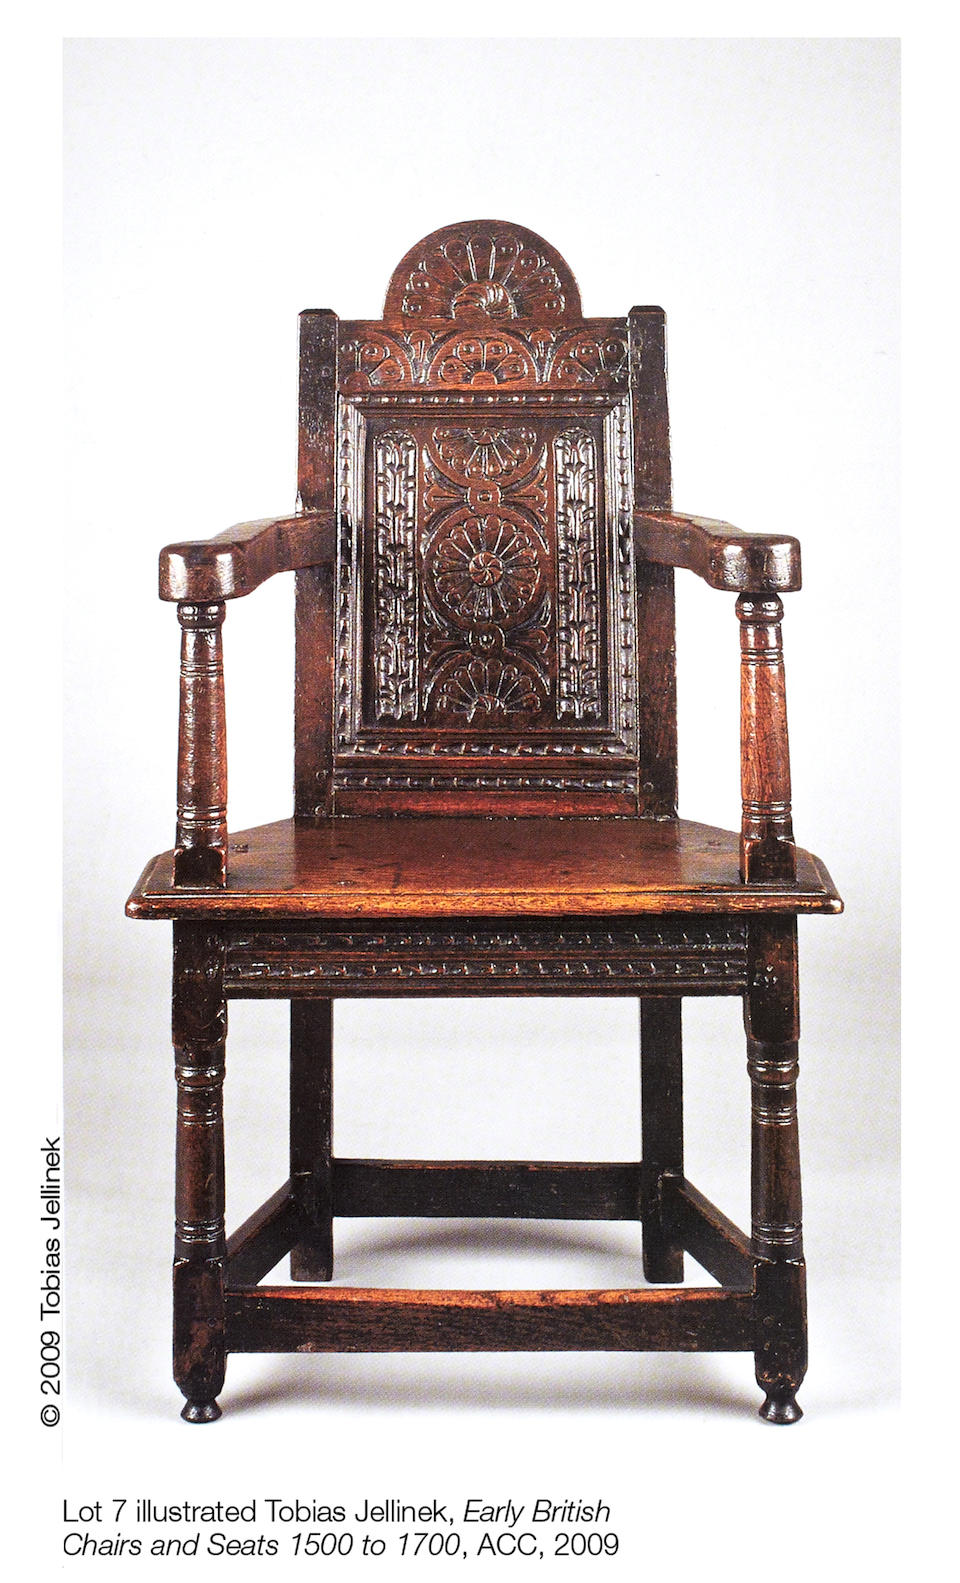 A rare James I joined oak adolescents' caqueteuse armchair, Salisbury, circa 1610 - 20 In the manner of the acclaimed Humphrey Beckham workshop